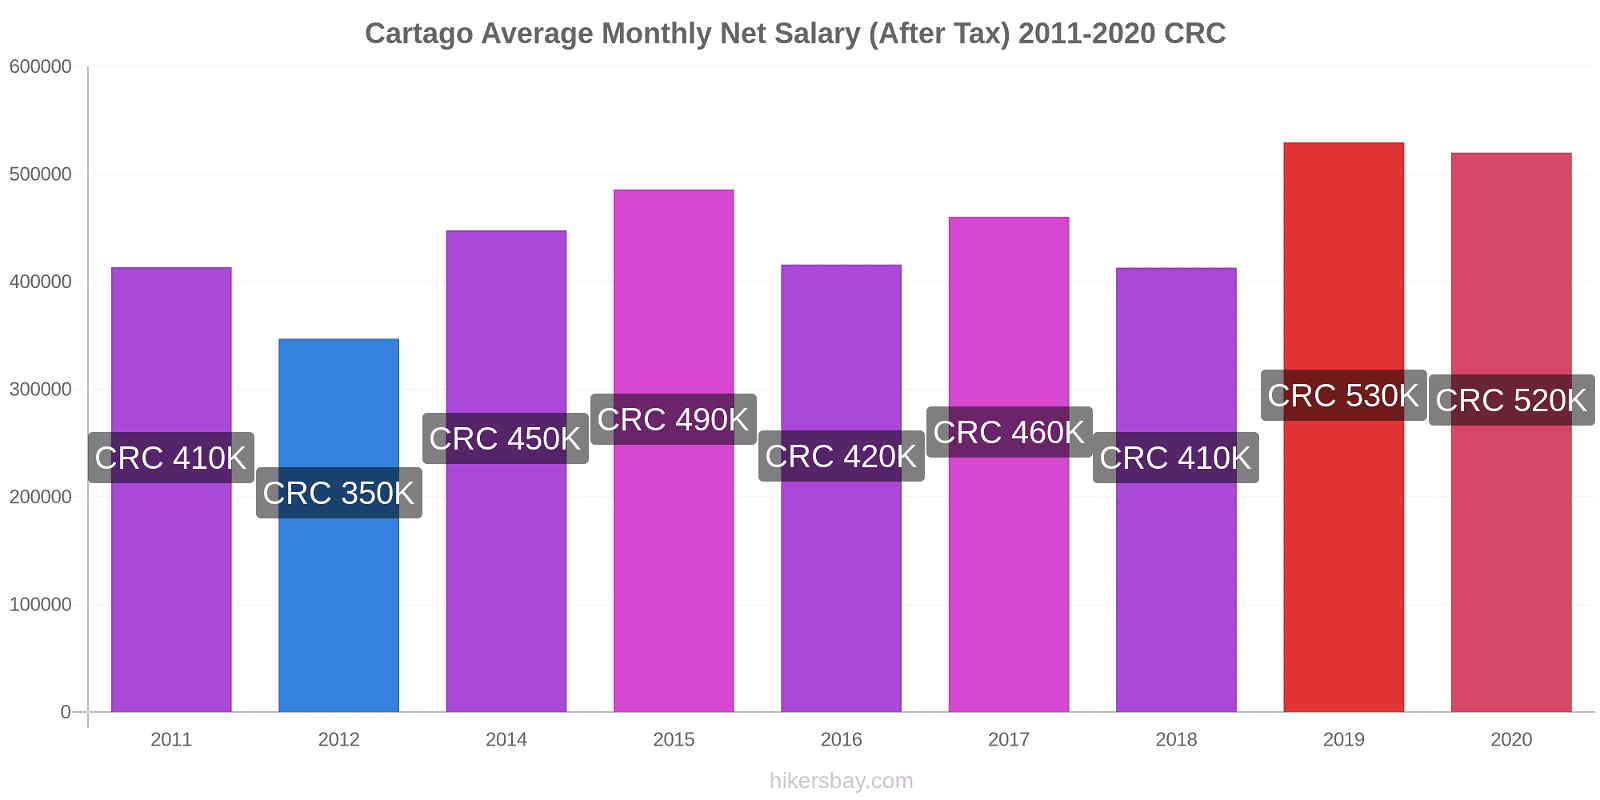 Cartago price changes Average Monthly Net Salary (After Tax) hikersbay.com